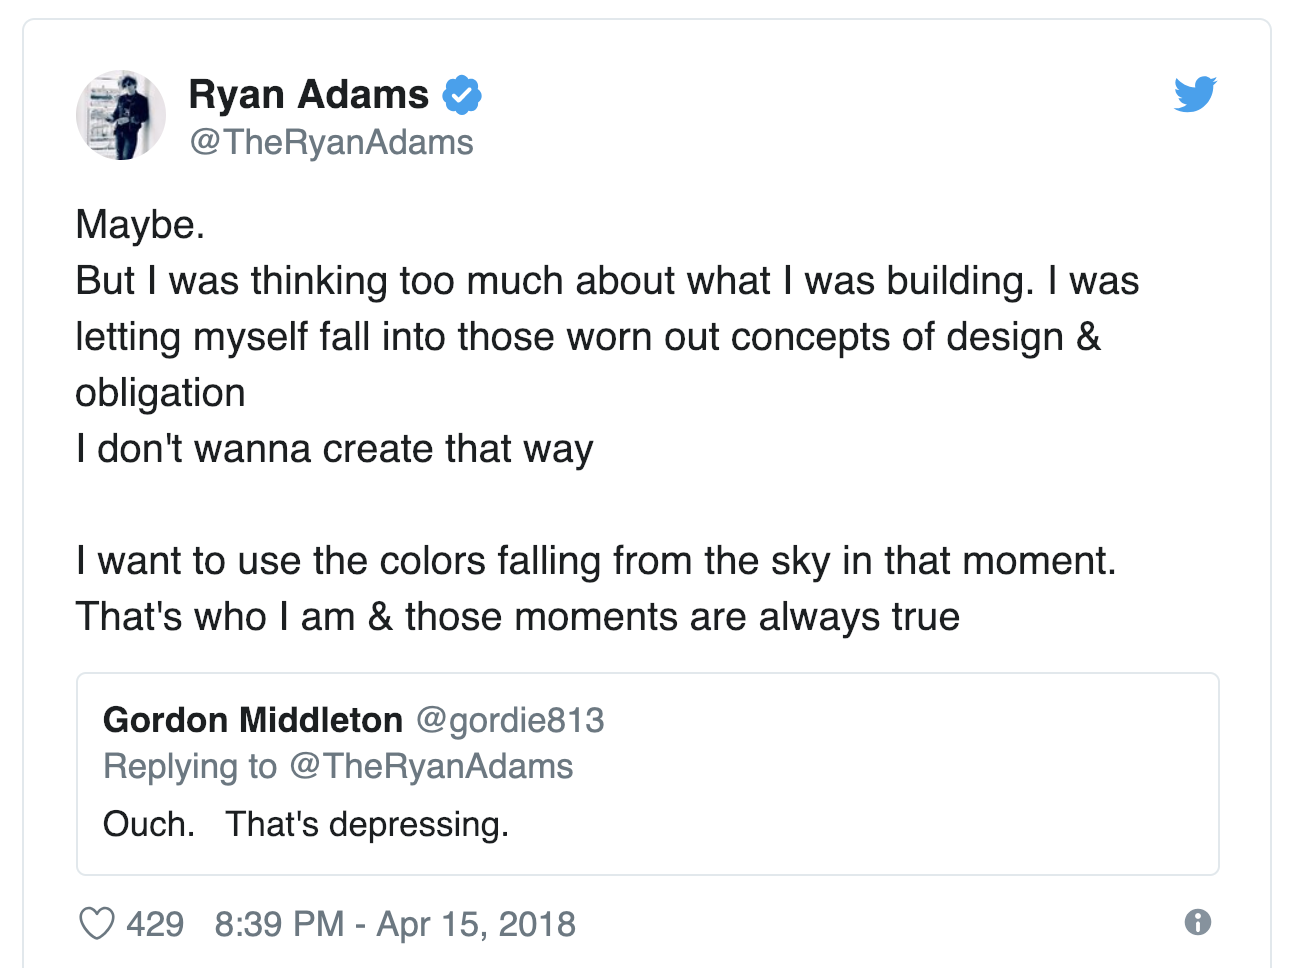 Ryan Adams first tweets about the album Big Colors